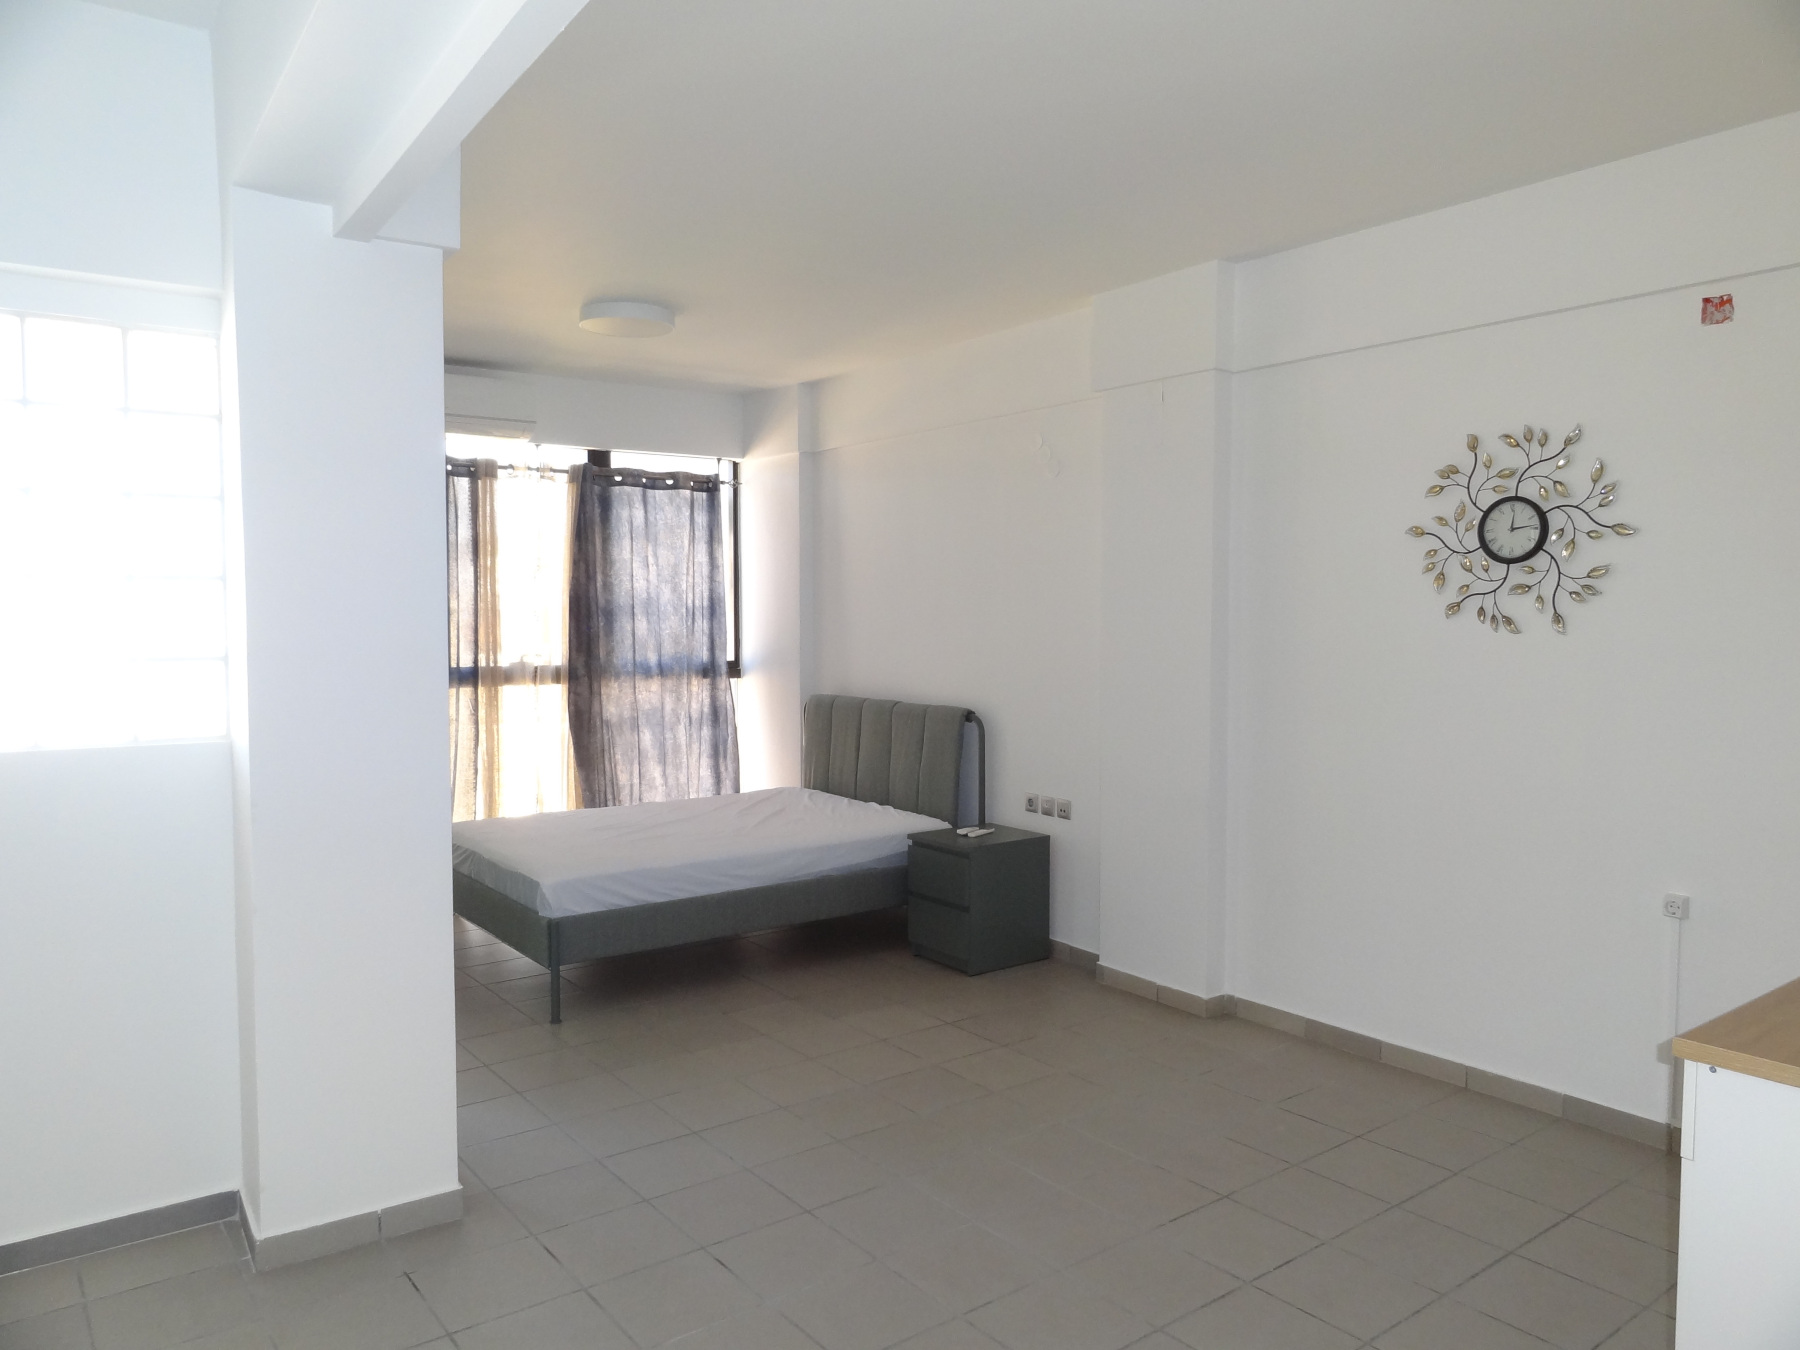 Studio for rent 39 sq.m. 2nd floor in a very central part of Ioannina